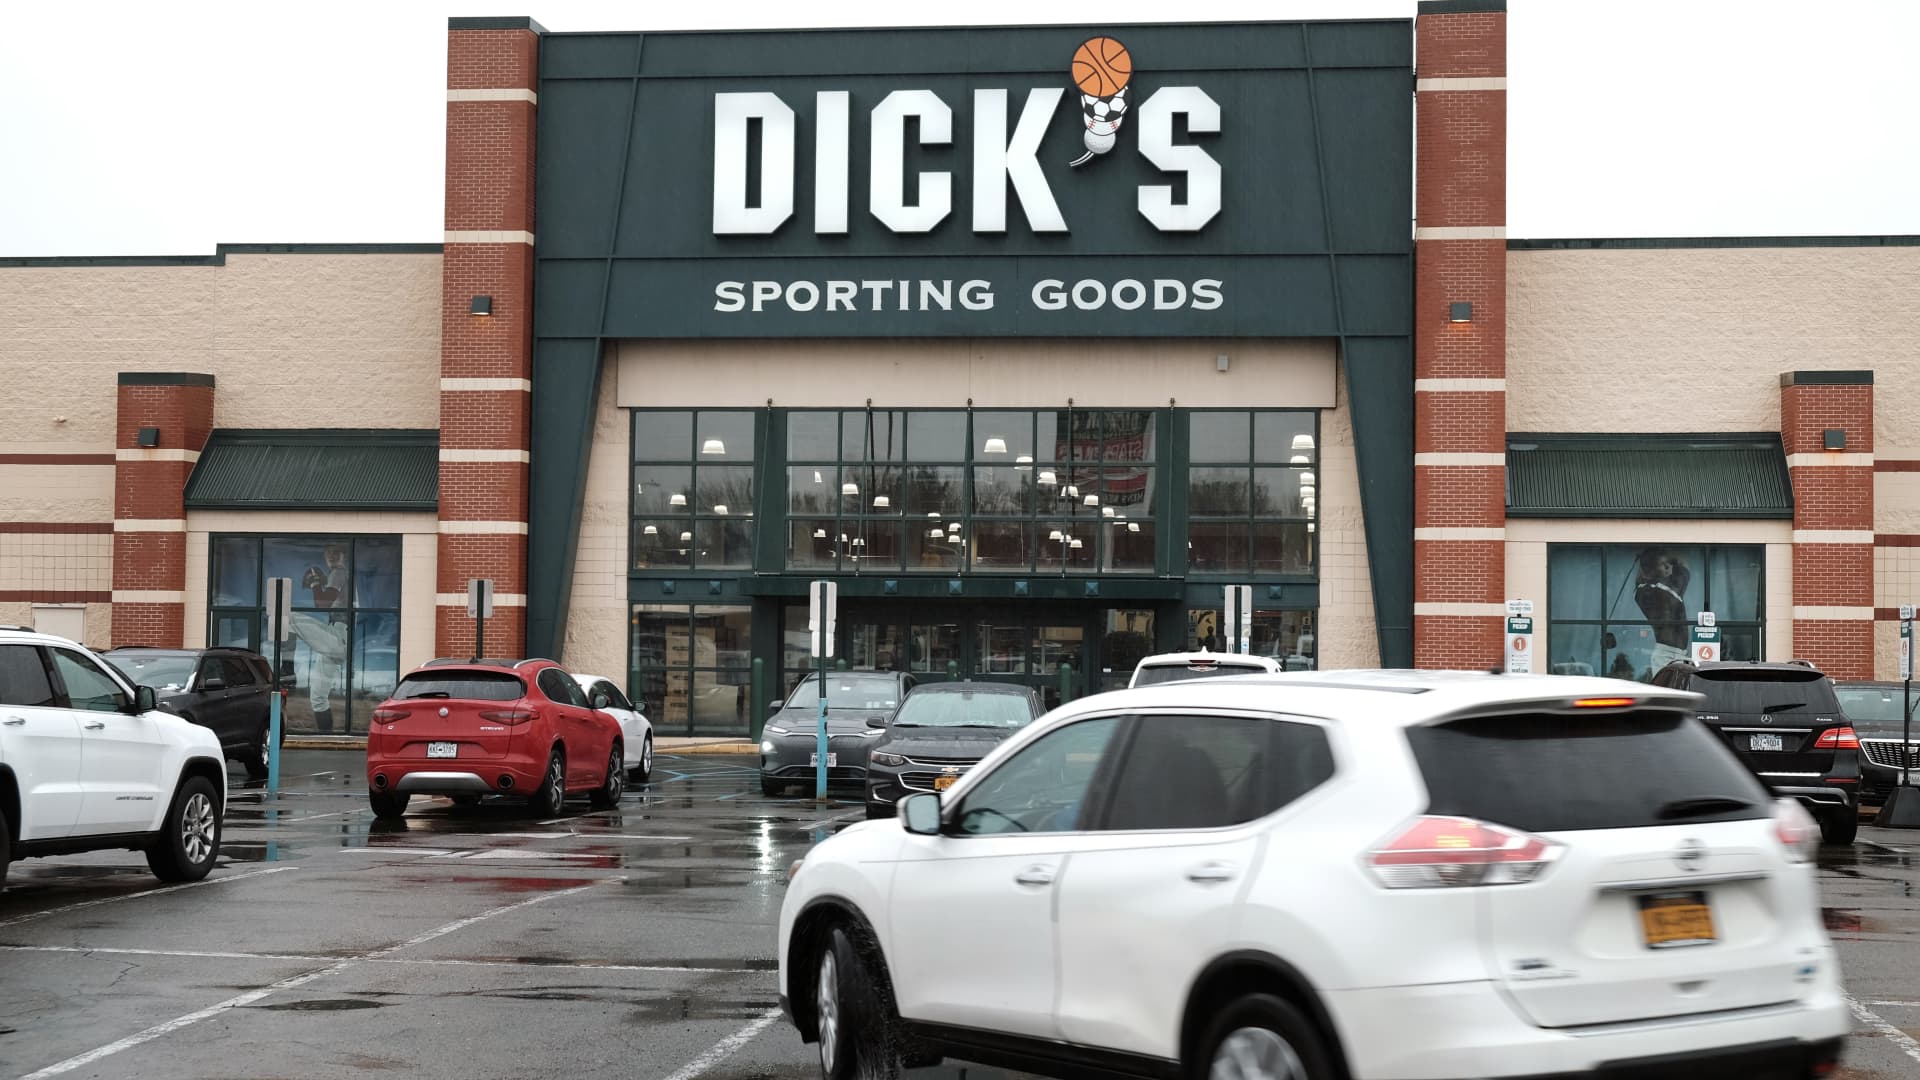 Dick's Sporting Goods, Fabrinet, Macy's, AppLovin and more